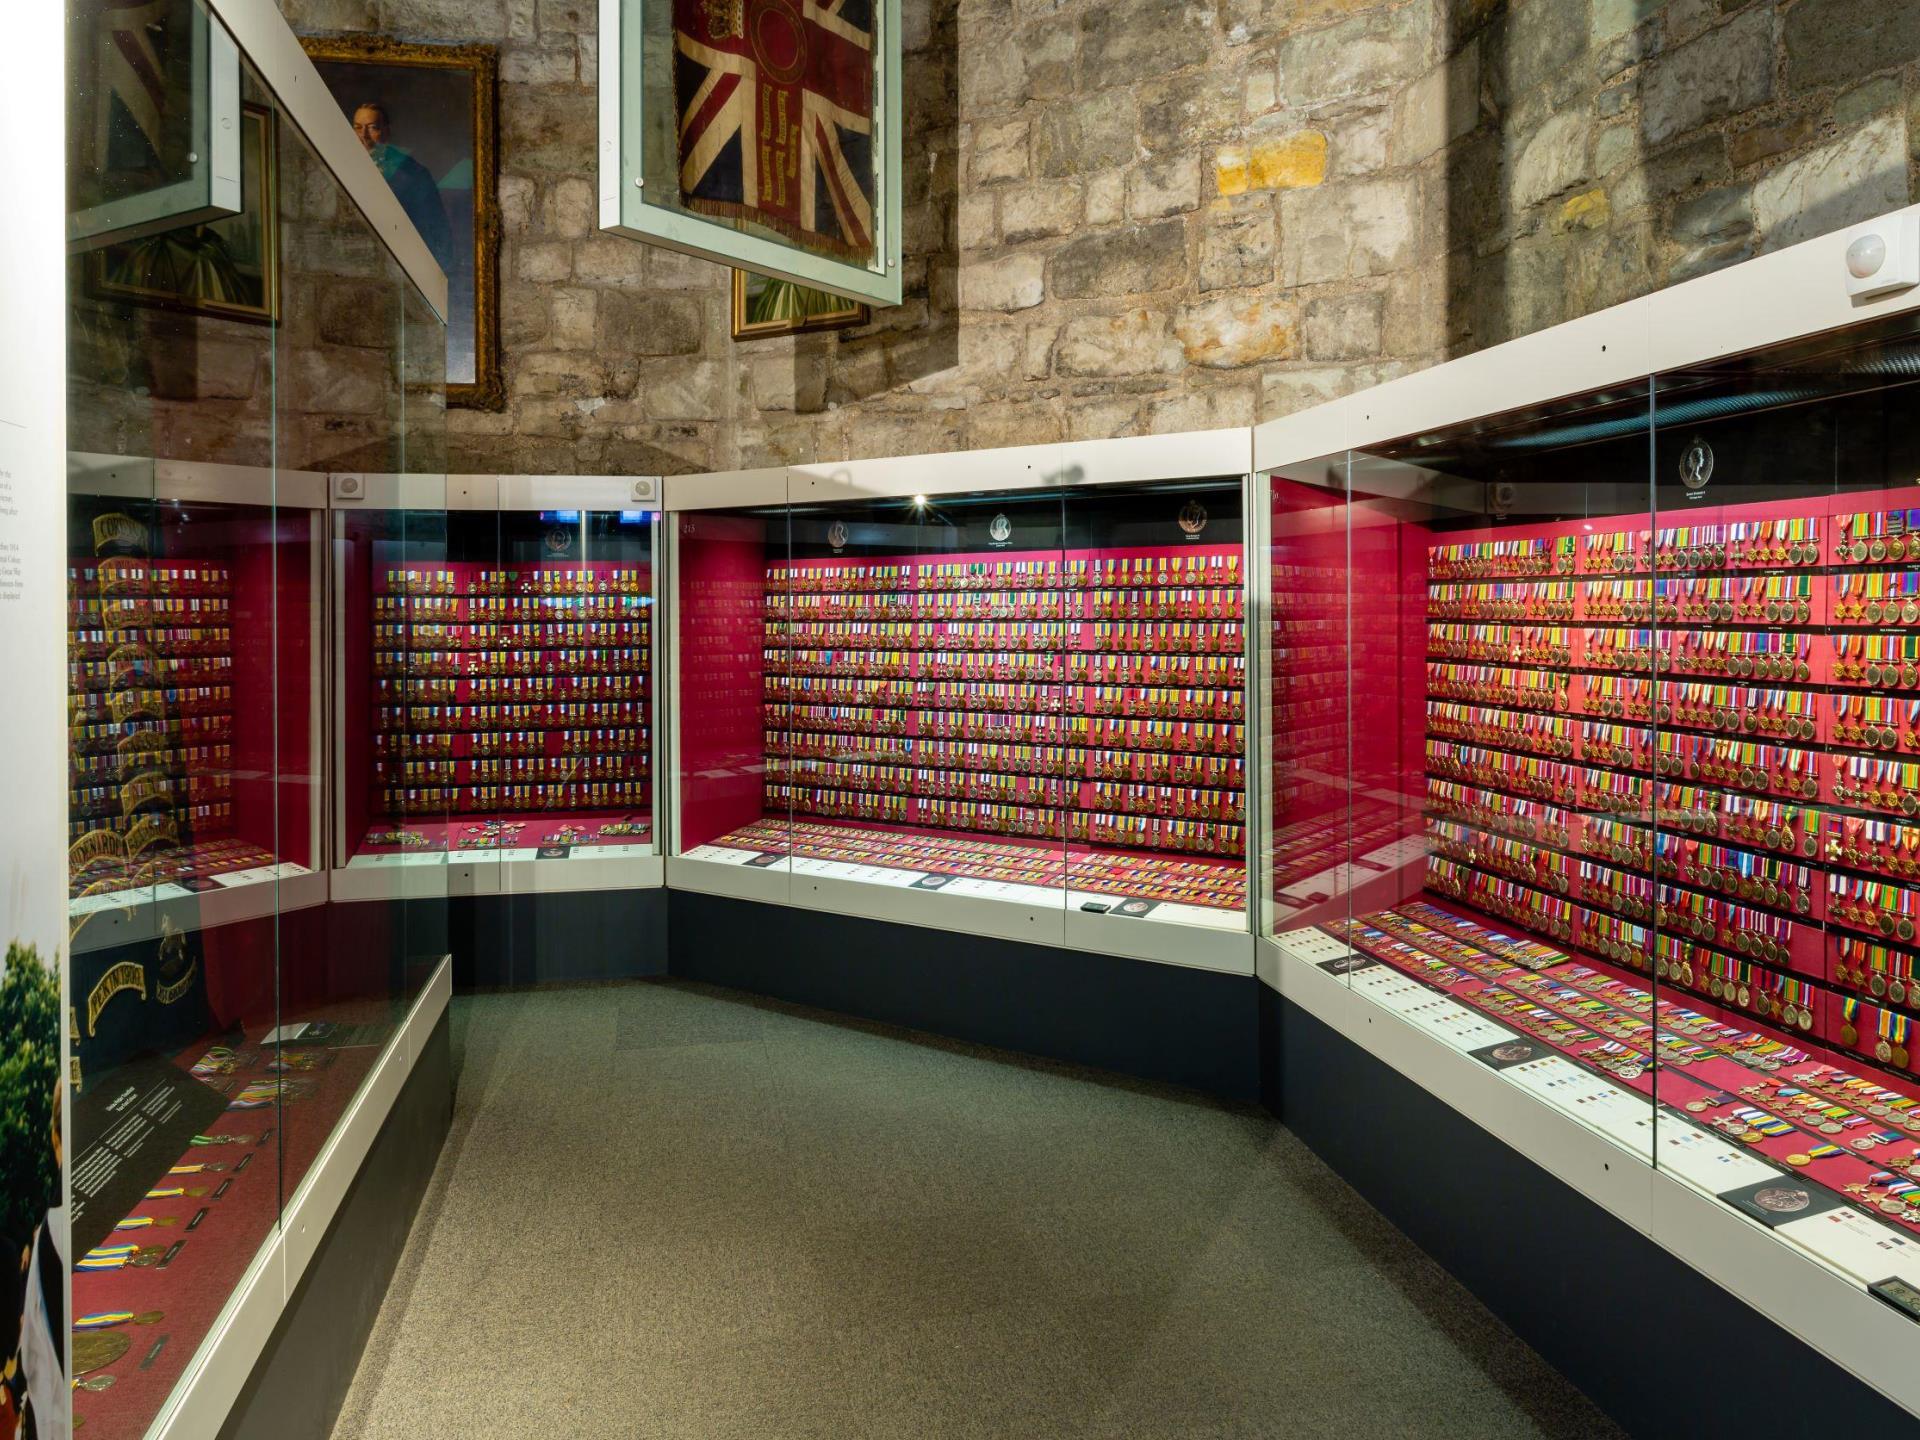 The Royal Welch Fusiliers Medal Room